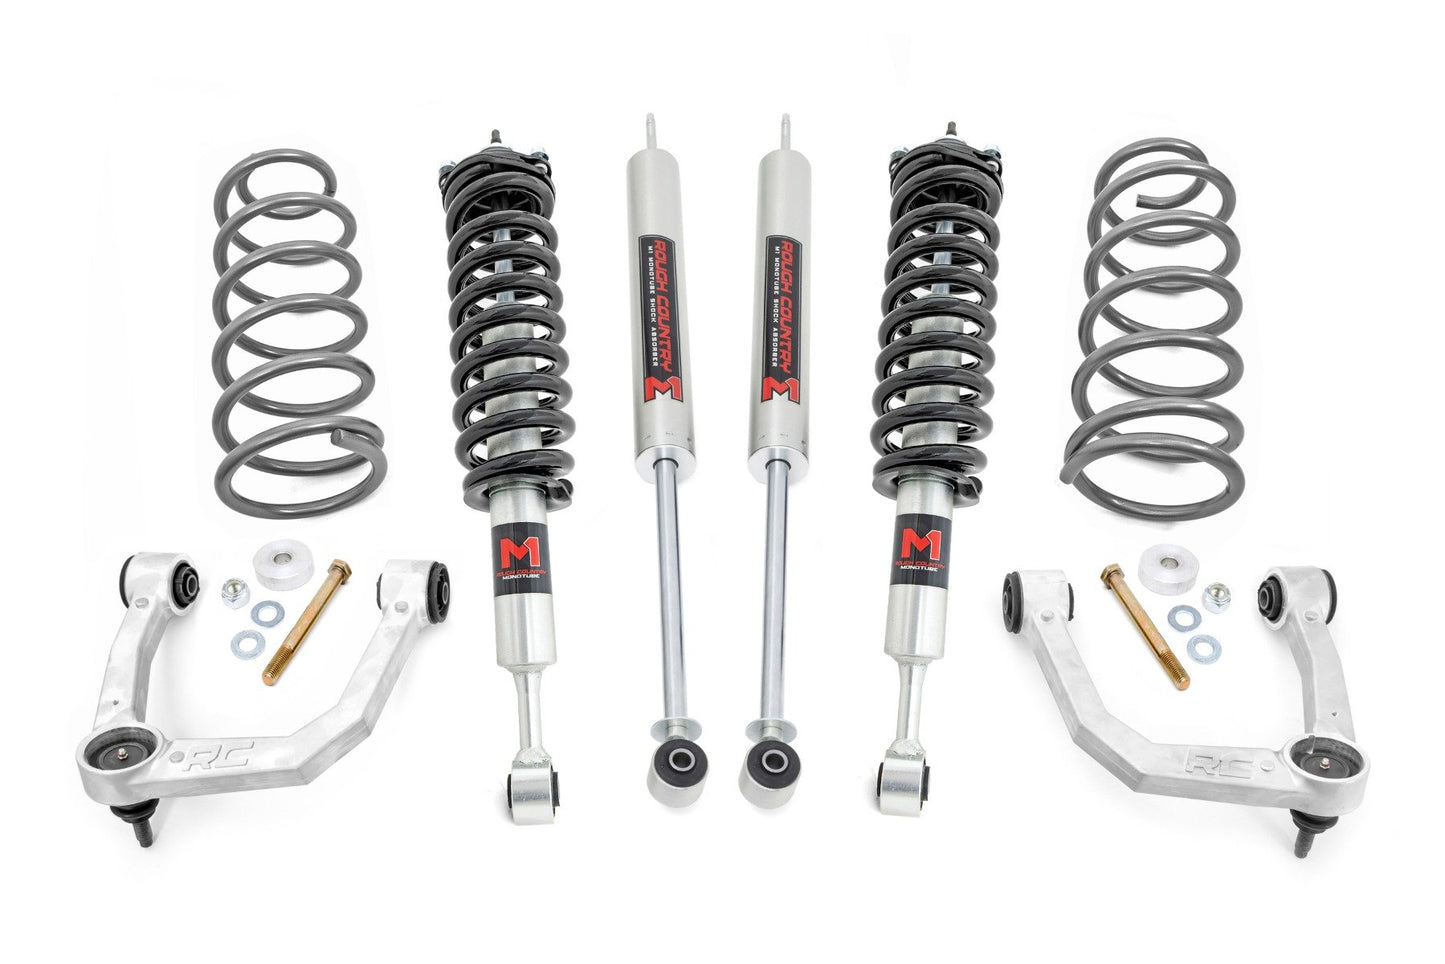 Rough Country 3 Inch Lift Kit | Upper Control Arms | RR Coils | M1 Struts | Toyota 4Runner (10-24)